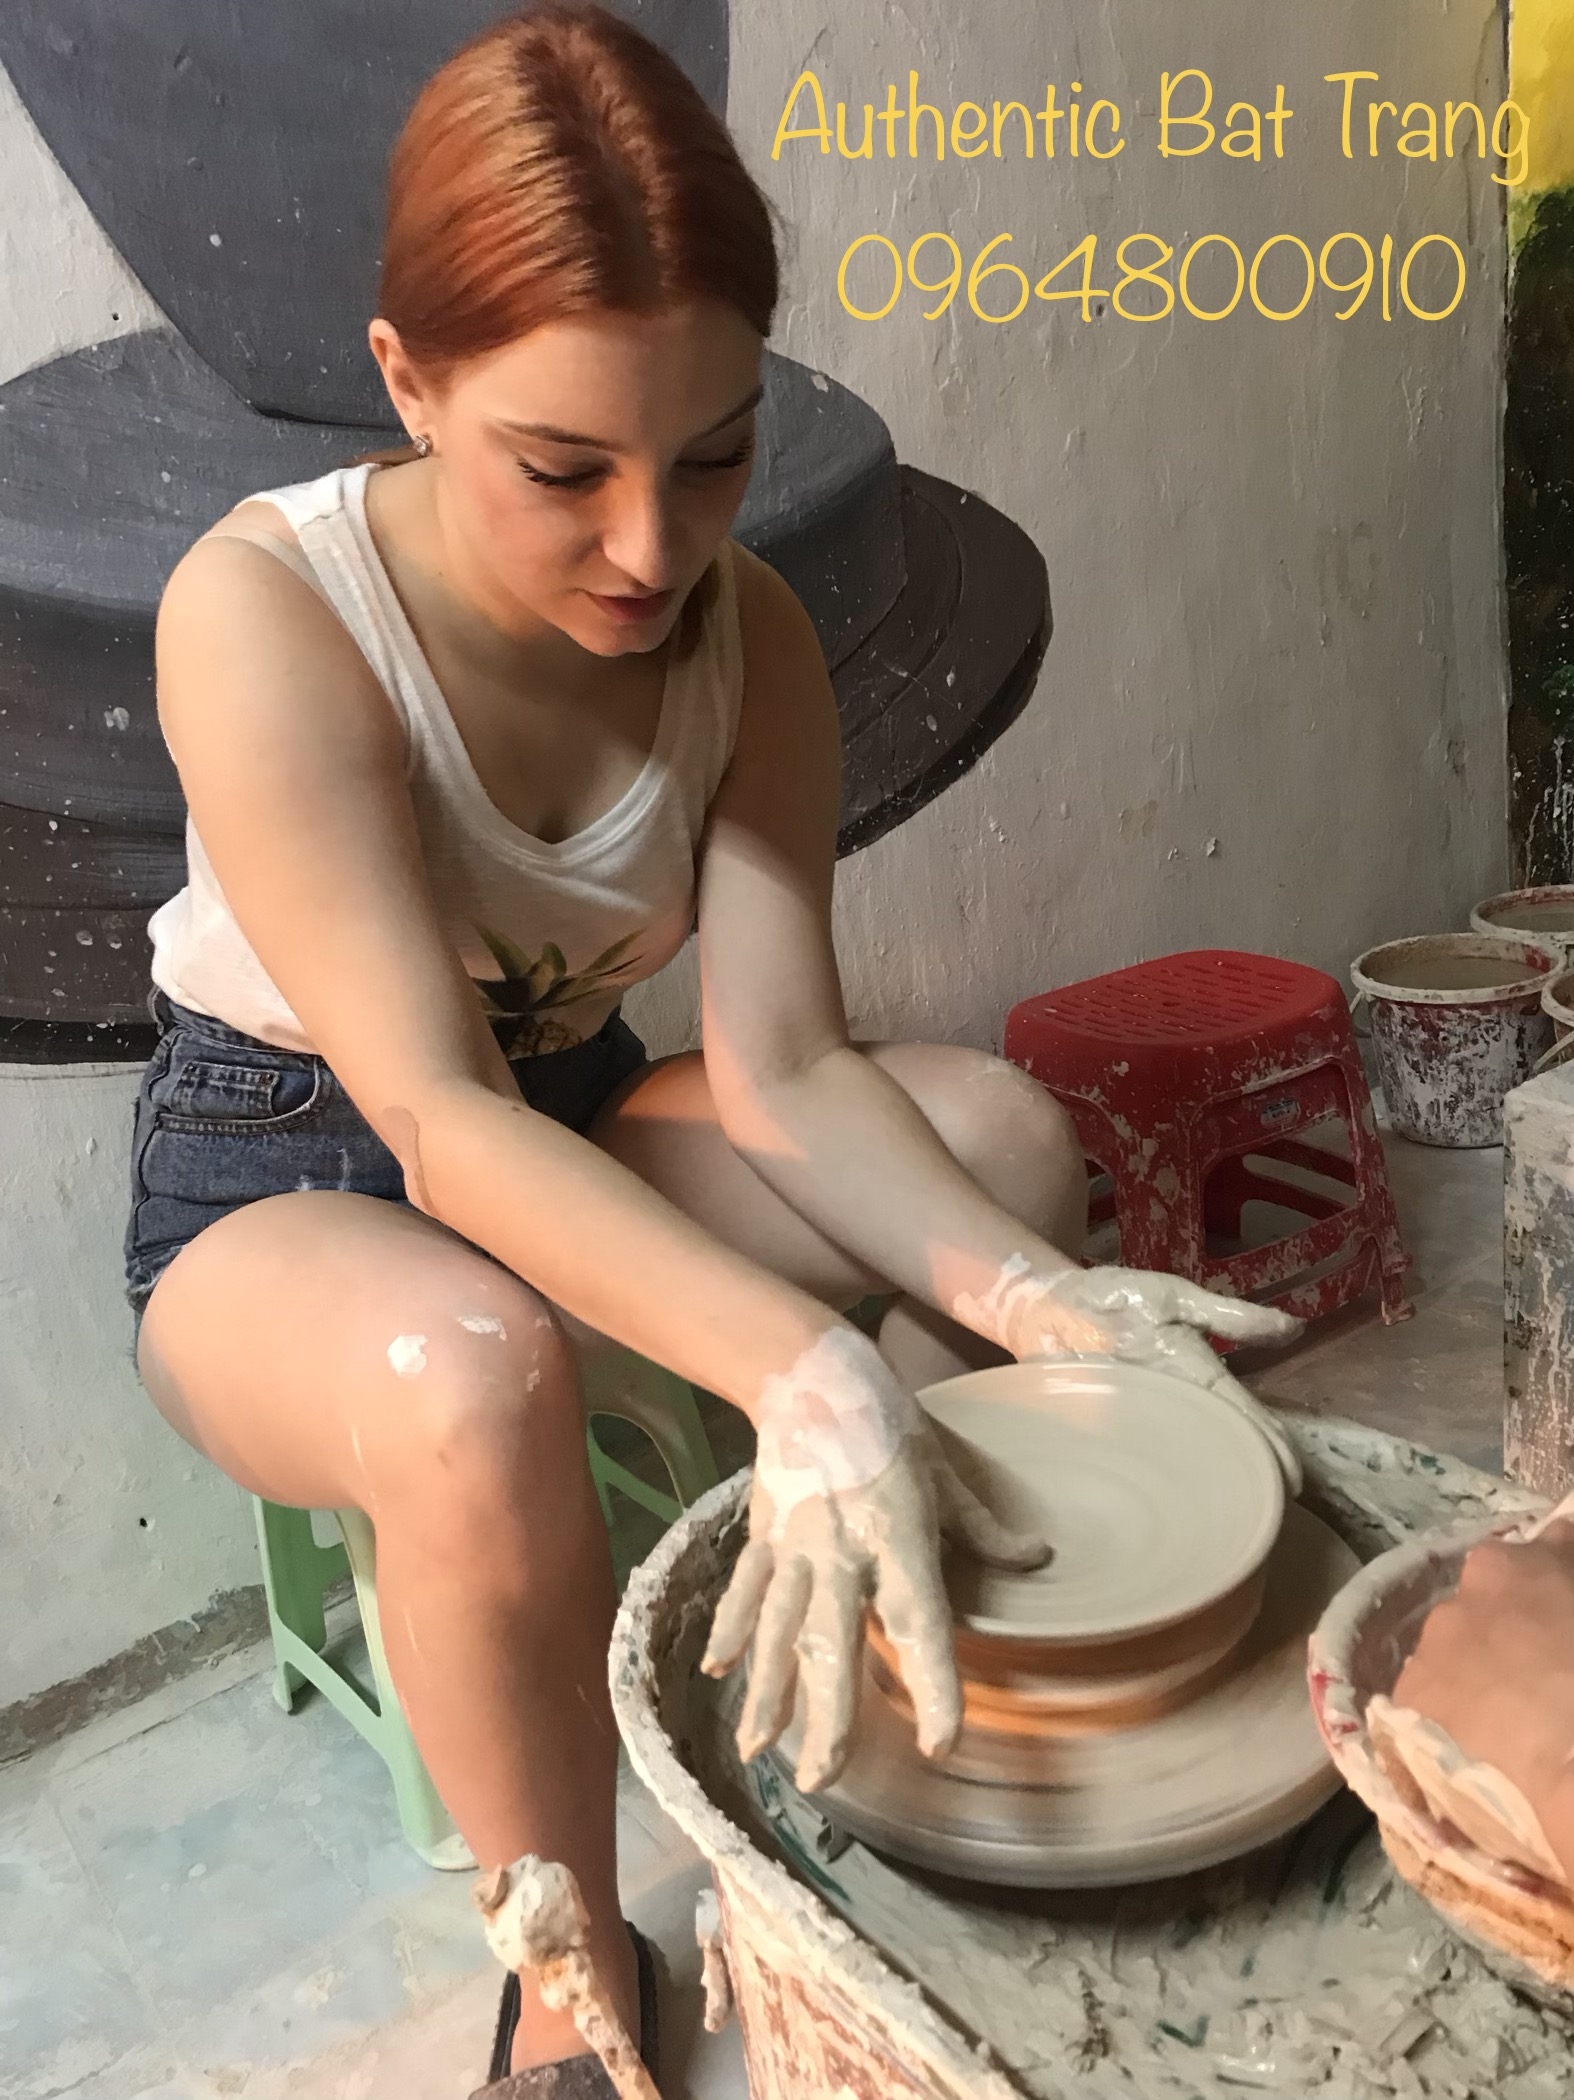 It was such an amazing experience with pottery teacher